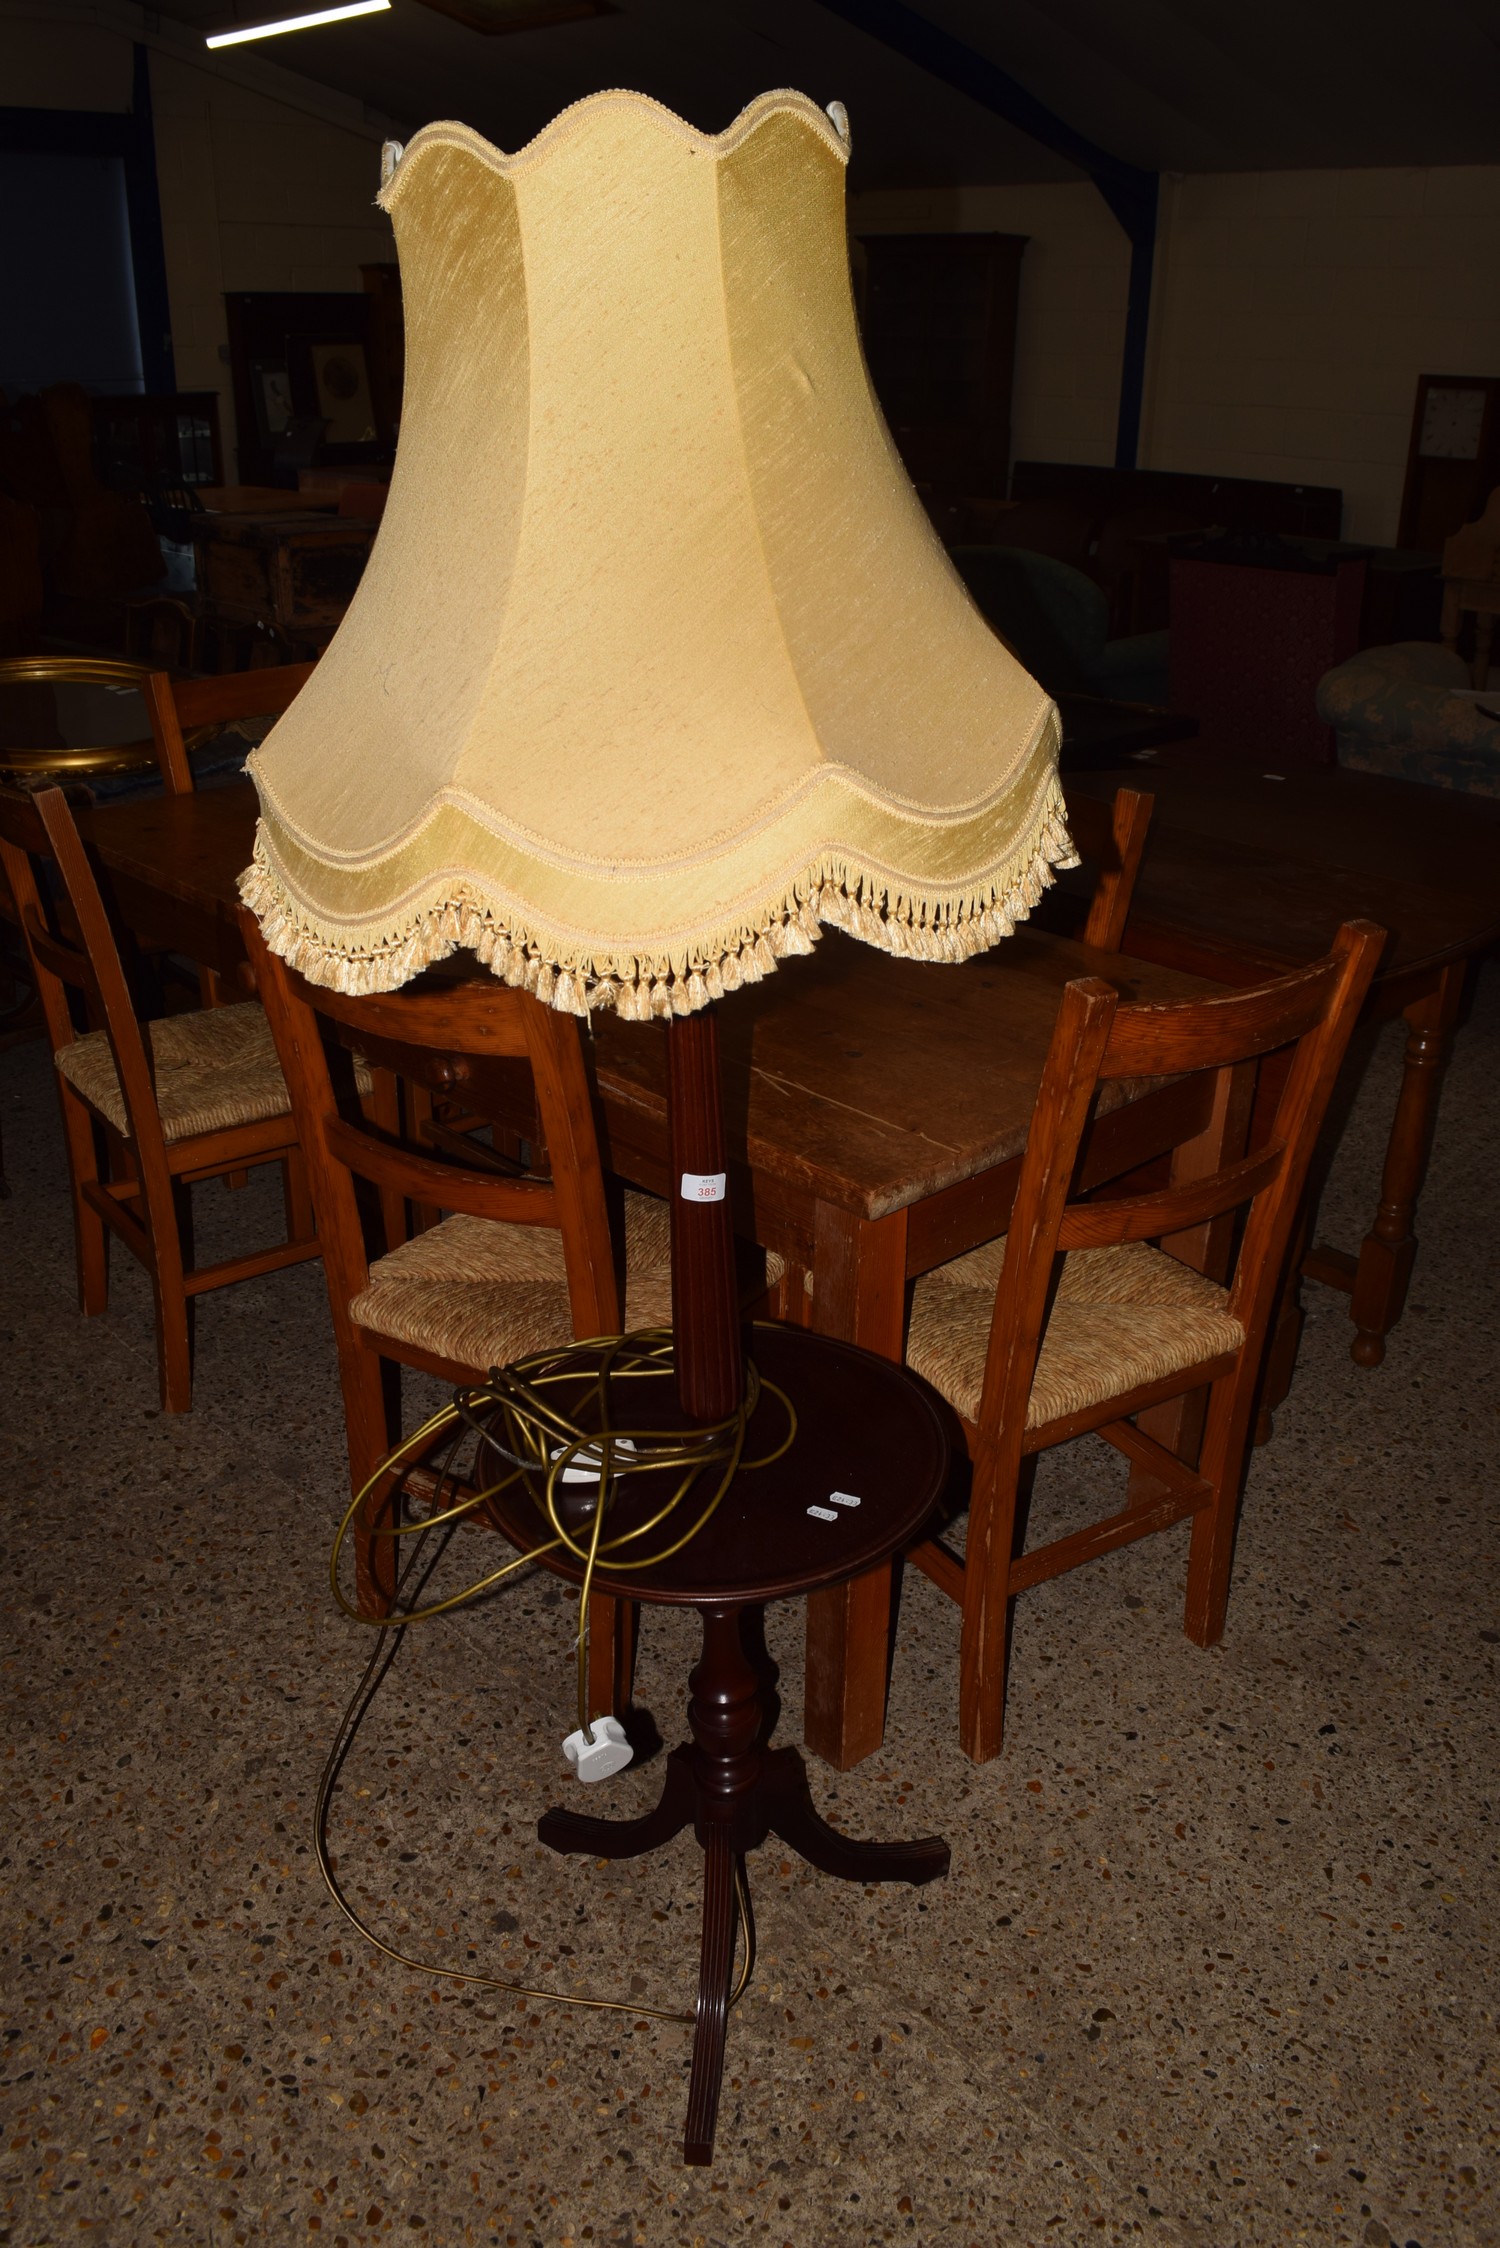 MAHOGANY EFFECT LAMP STANDARD WITH SHADE, HEIGHT APPROX 162CM